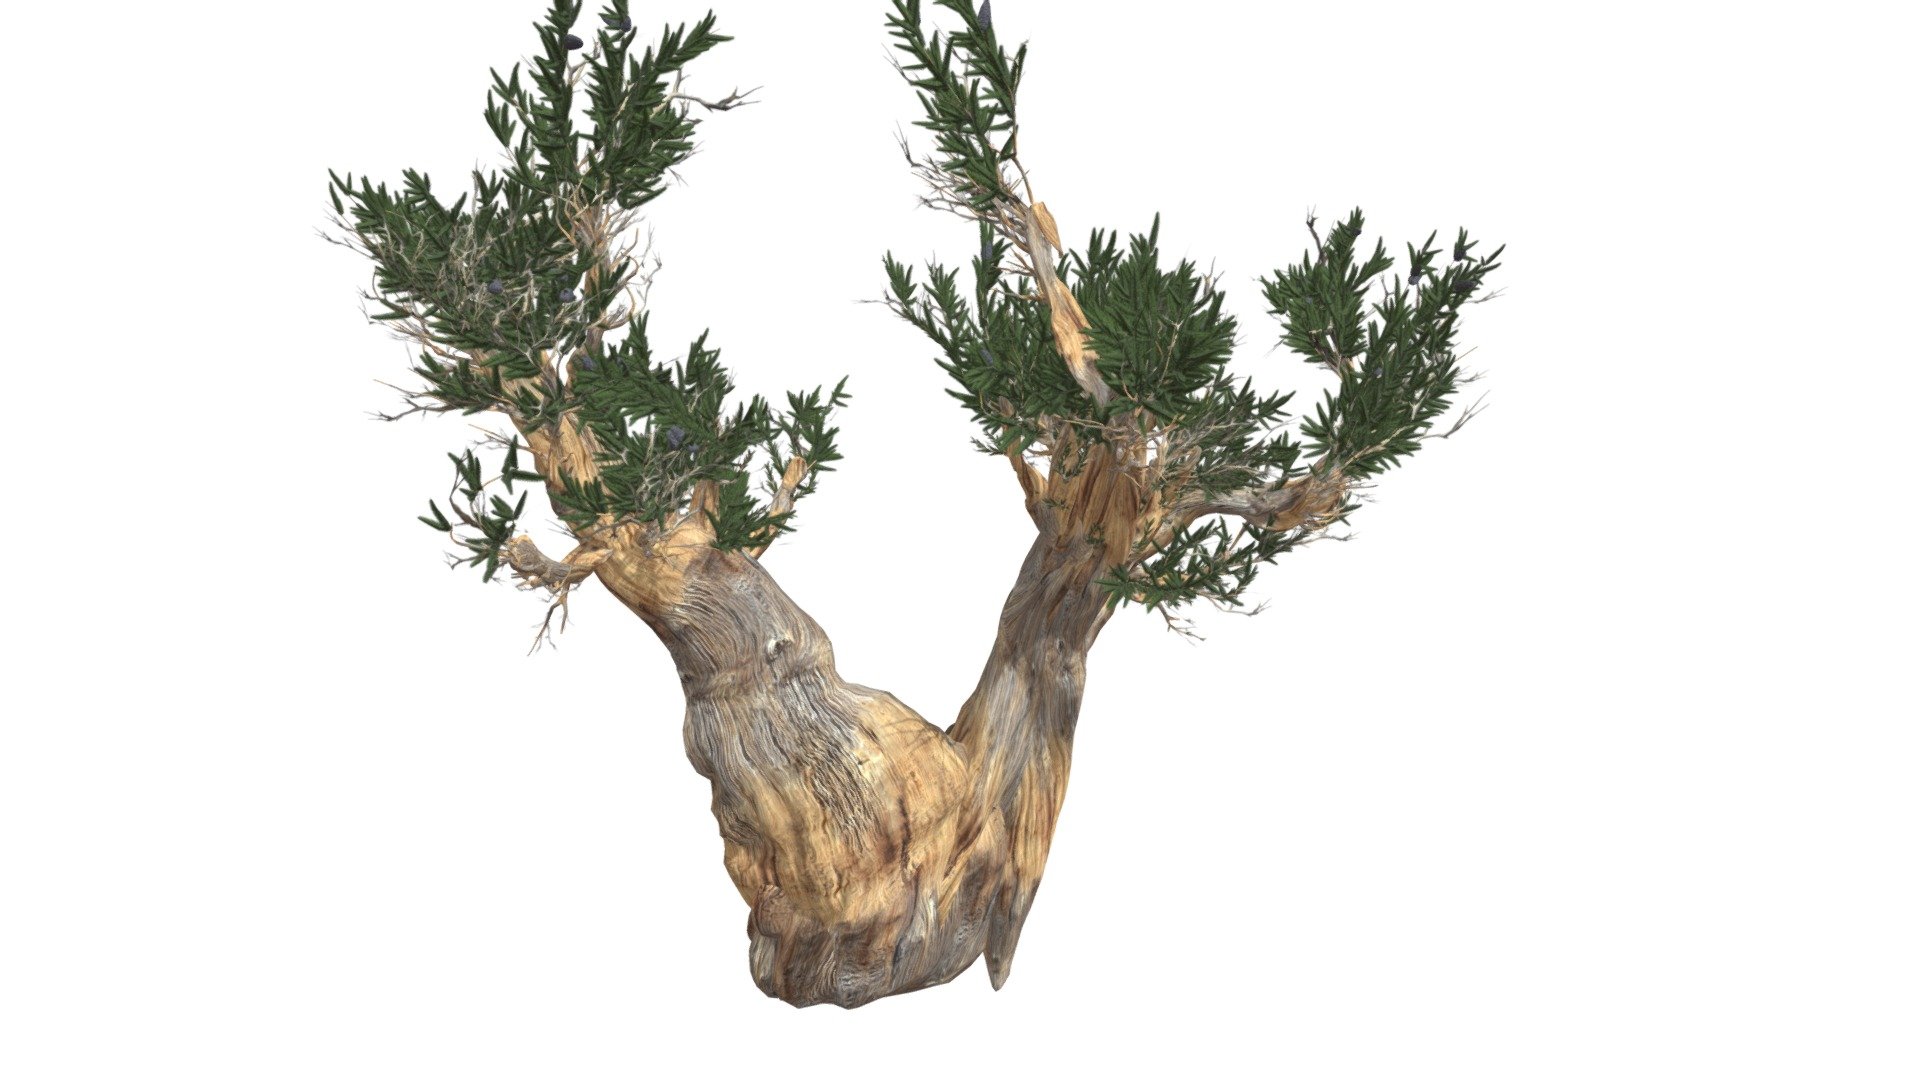 This 3D model of the Bristlecone Pine Tree is a highly detailed and photorealistic option suitable for architectural, landscaping, and video game projects. The model is designed with carefully crafted textures that mimic the natural beauty of a real Bristlecone Pine Tree. Its versatility allows it to bring a touch of realism to any project, whether it’s a small architectural rendering or a large-scale landscape design. Additionally, the model is optimized for performance and features efficient UV mapping. This photorealistic 3D model is the perfect solution for architects, landscapers, and game developers who want to enhance the visual experience of their project with a highly detailed, photorealistic Bristlecone Pine Tree 3d model